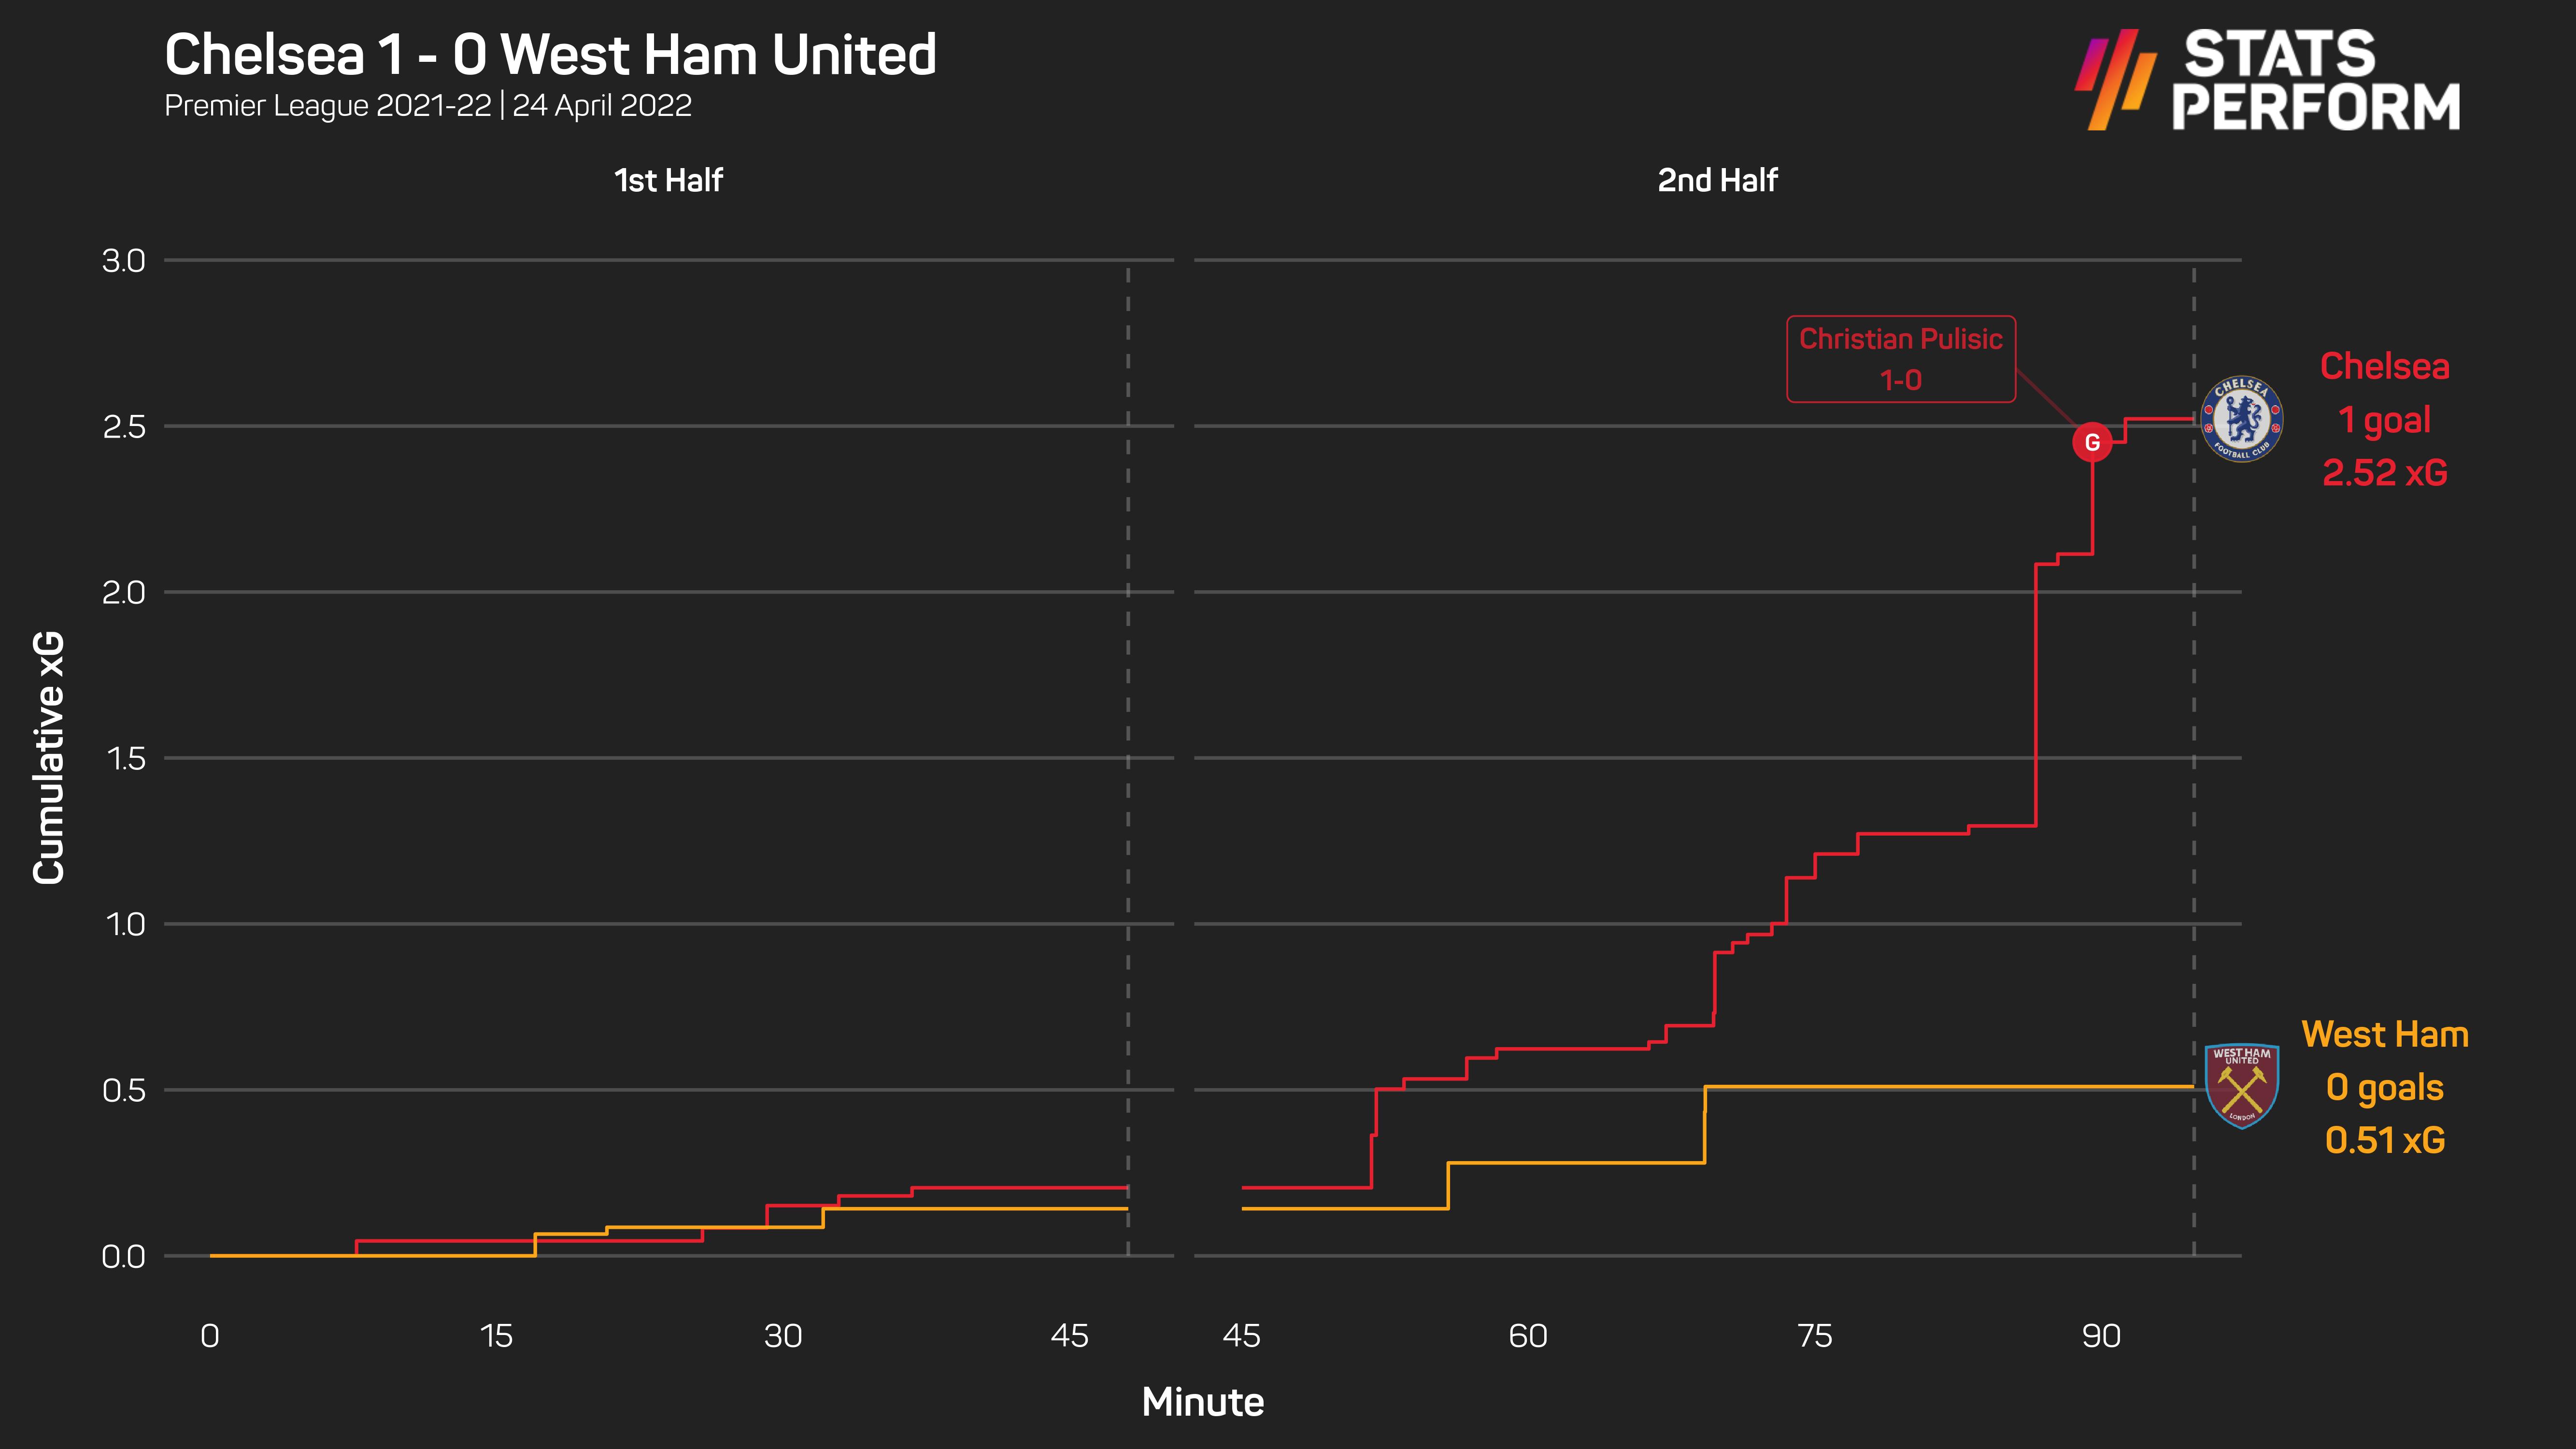 Chelsea just edged out a win against West Ham